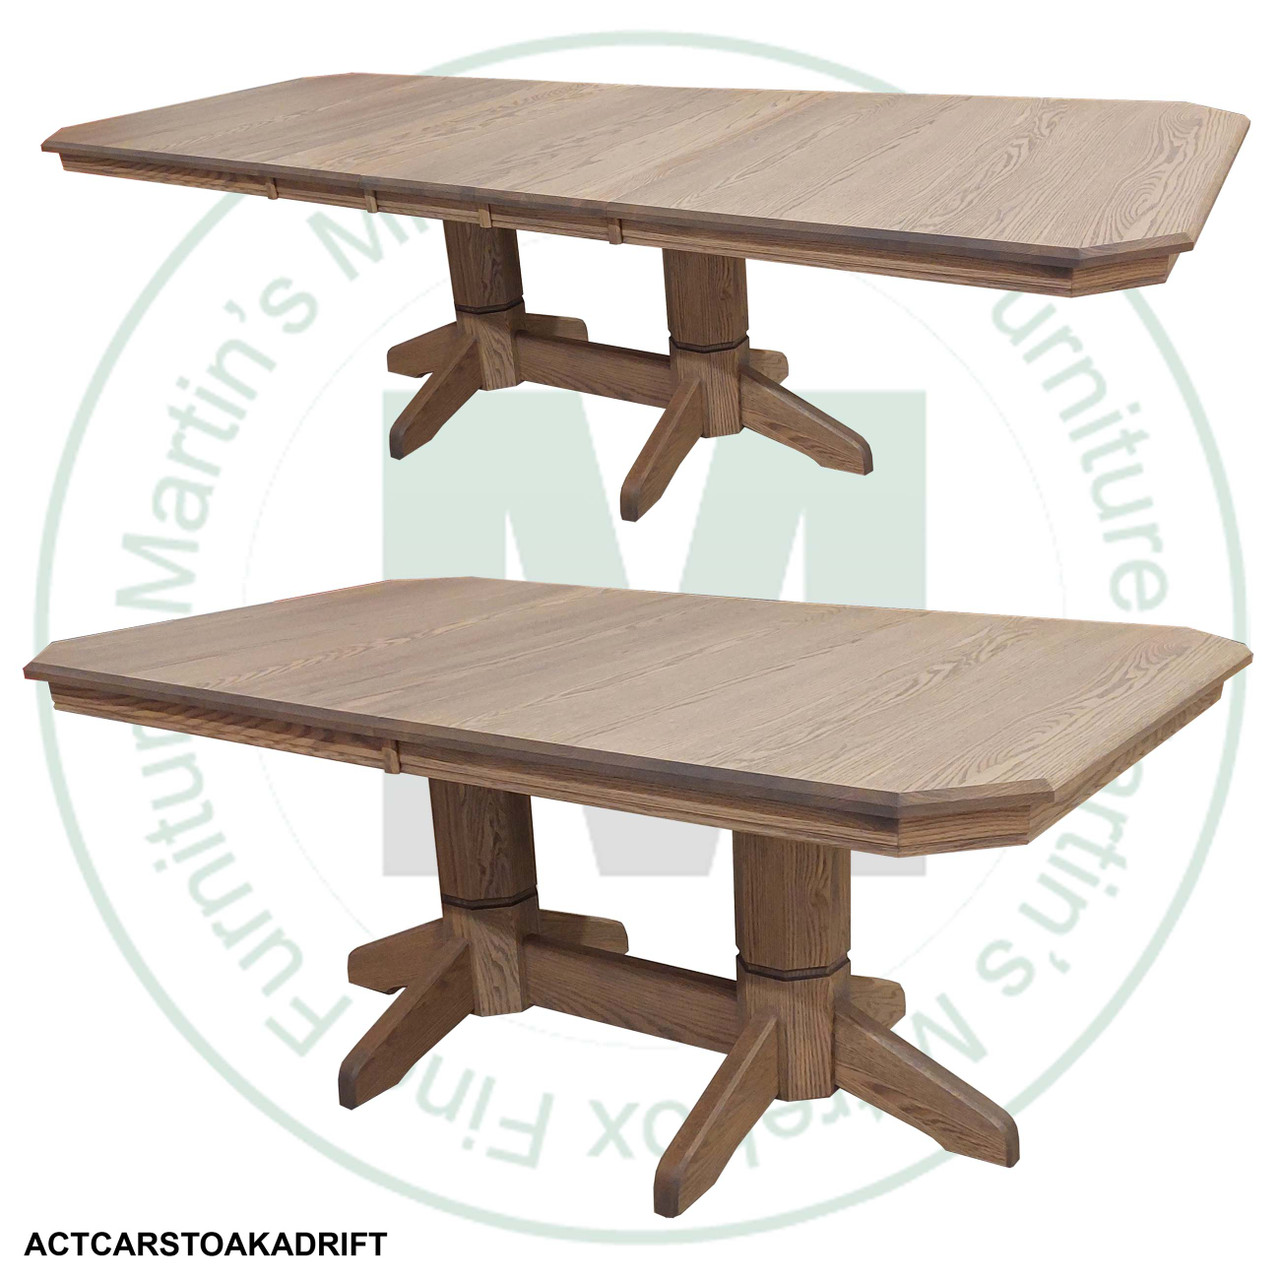 Wormy Maple Urban Classic Double Pedestal Table 48''D x 72''W x 30''H With 3 - 12'' Leaves